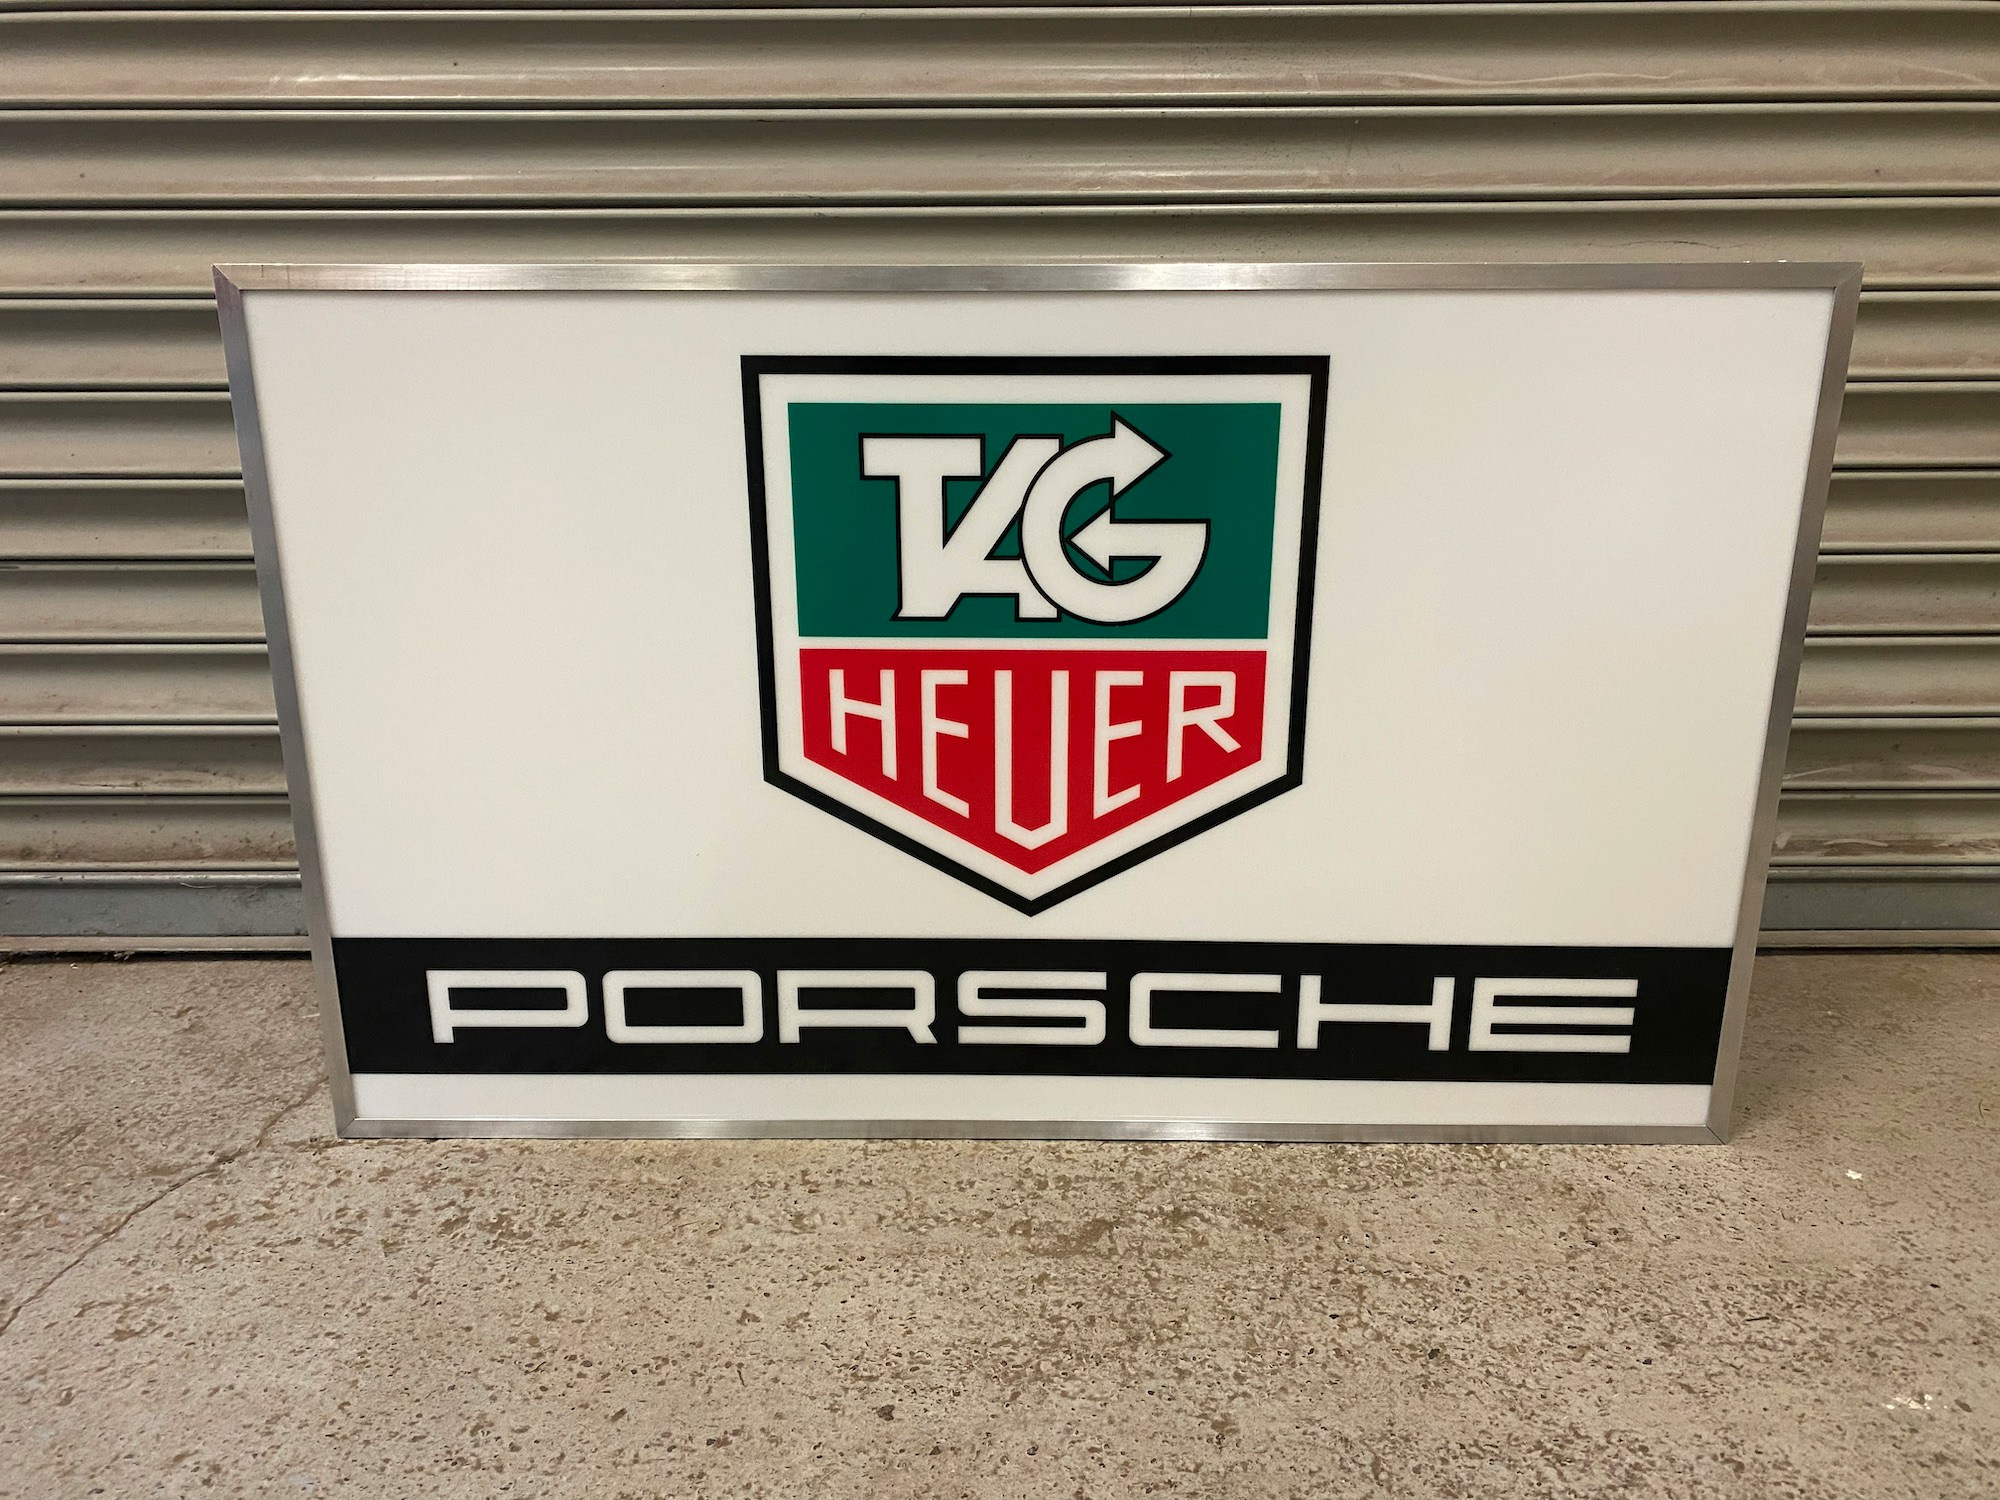 TAG HEUER PORSCHE ILLUMINATED SIGN for sale by auction in West Midlands,  United Kingdom